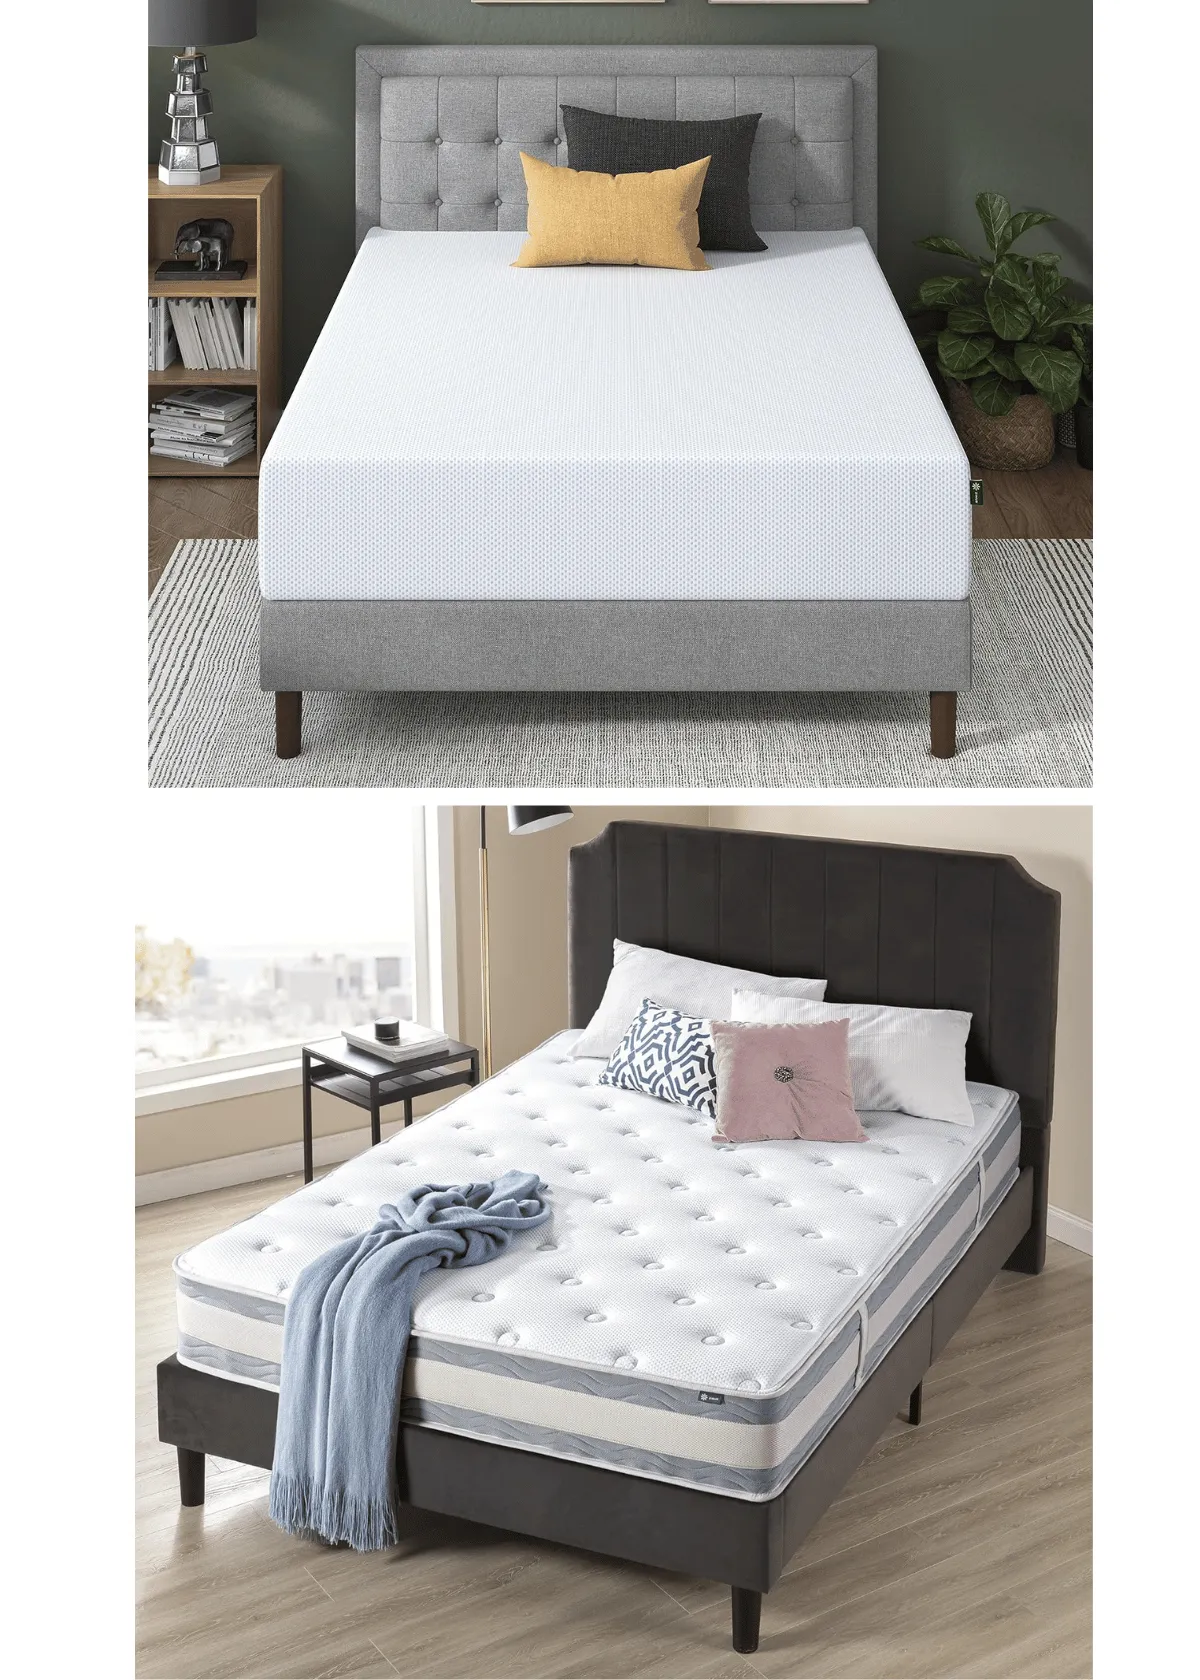 "The Best Affordable ZINUS Green Tea Mattress for Side Sleepers"